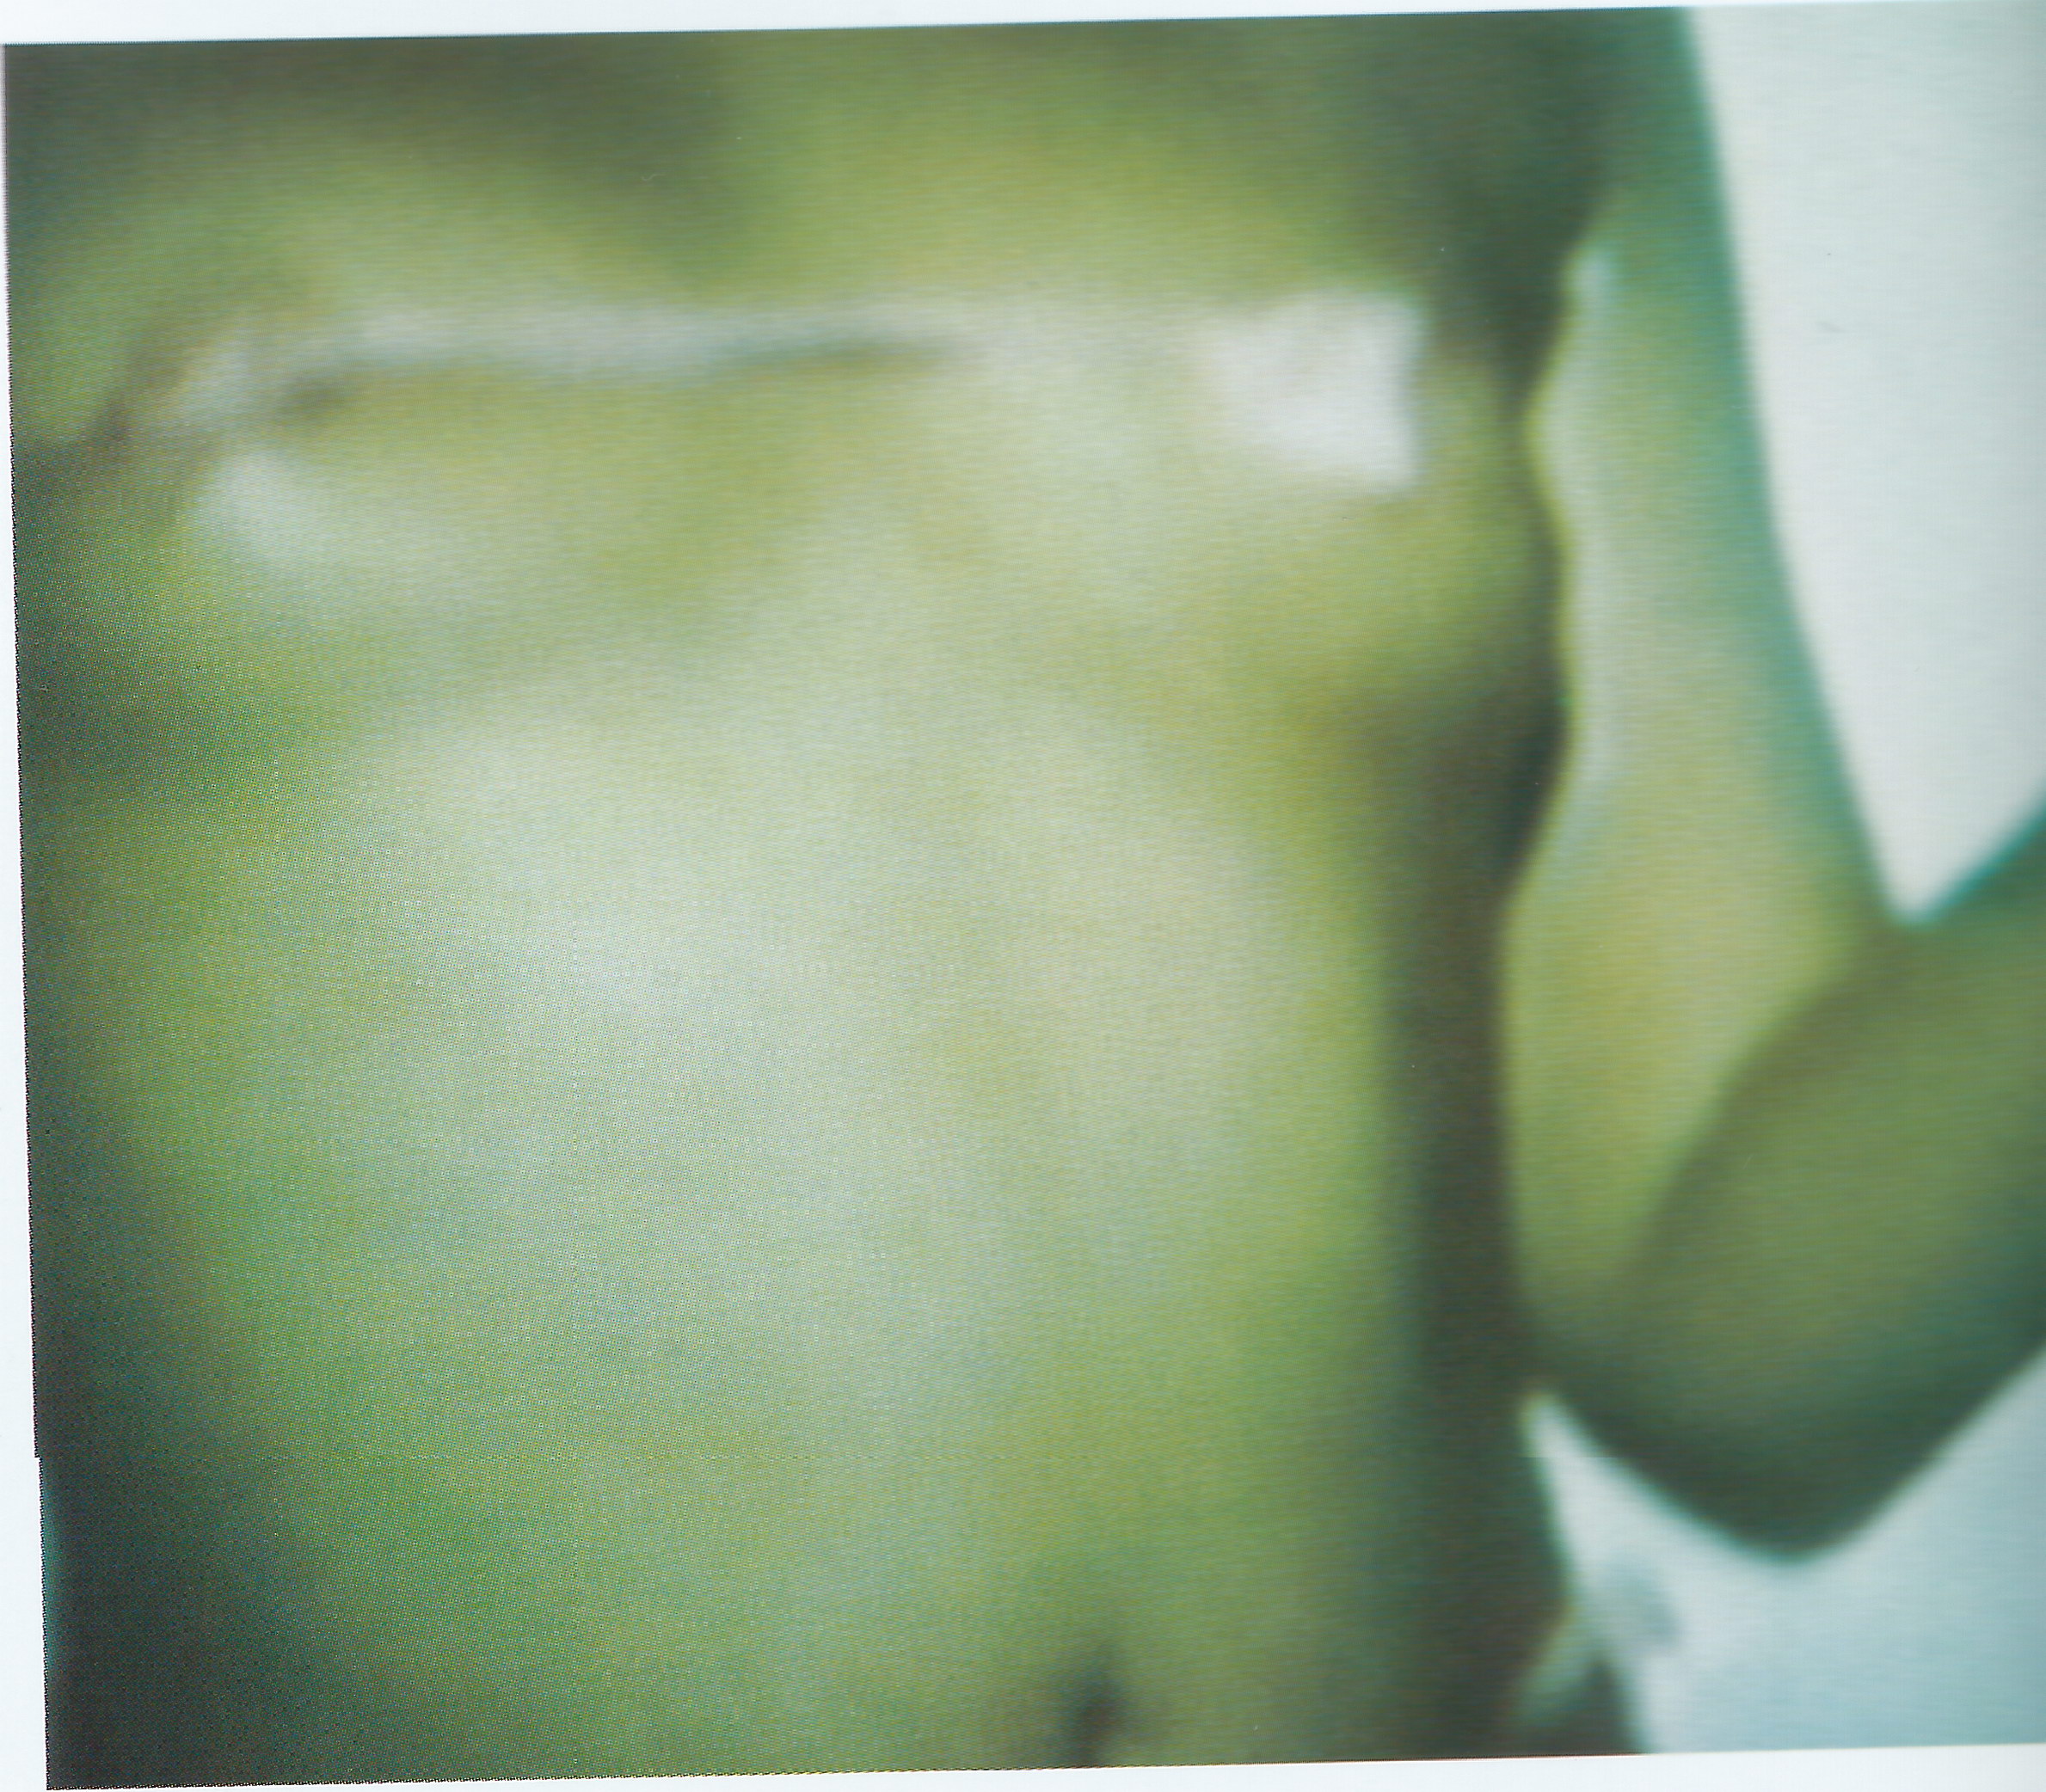 Kylie_Minogue_fully_nude_from_her_1999_book_Kylie_9x_UHQ_7.JPG